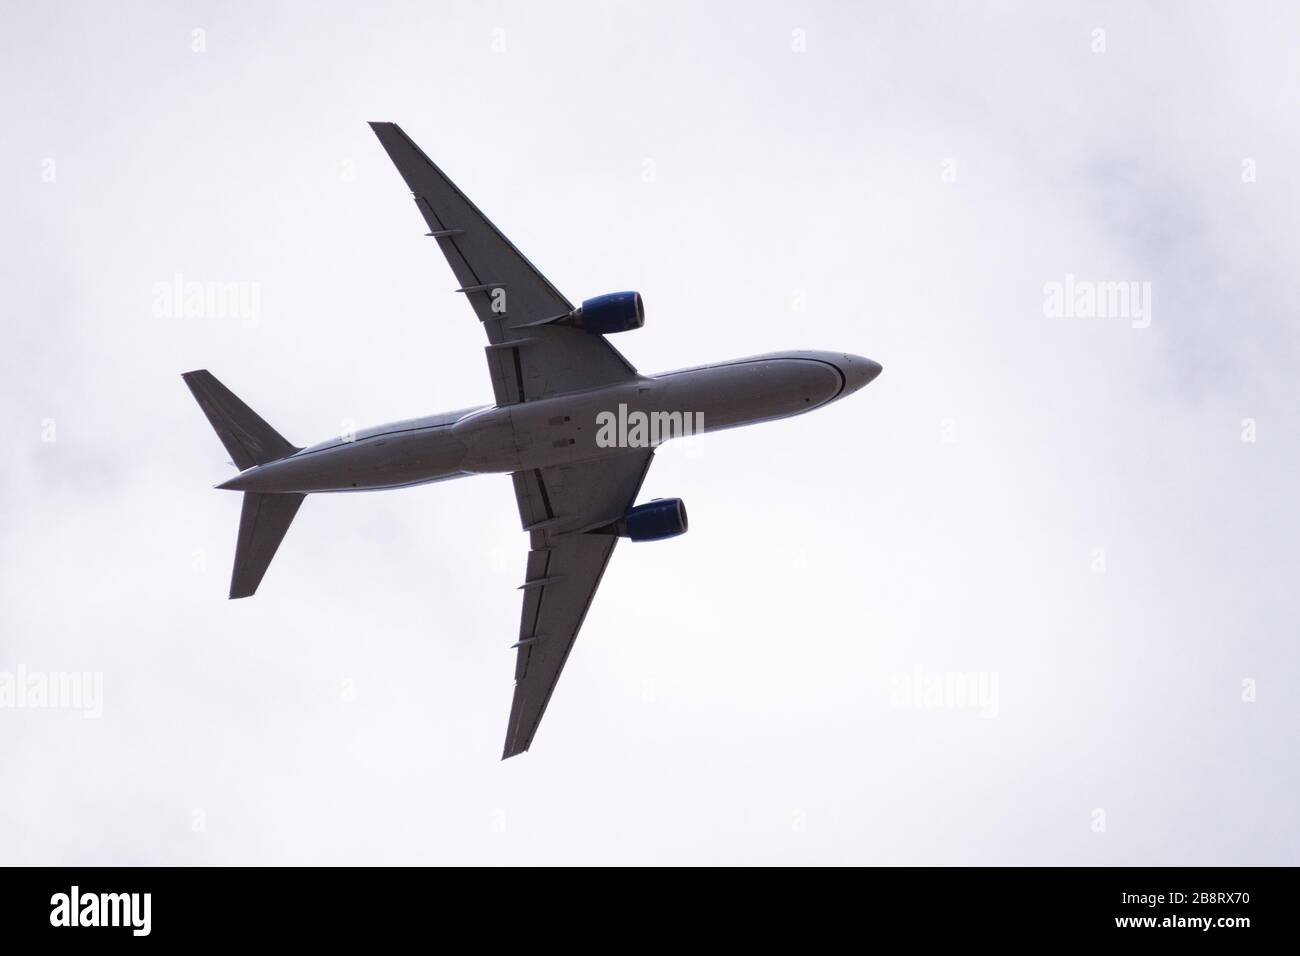 Low angle view of Commercial airplane in mid flight; Stock Photo